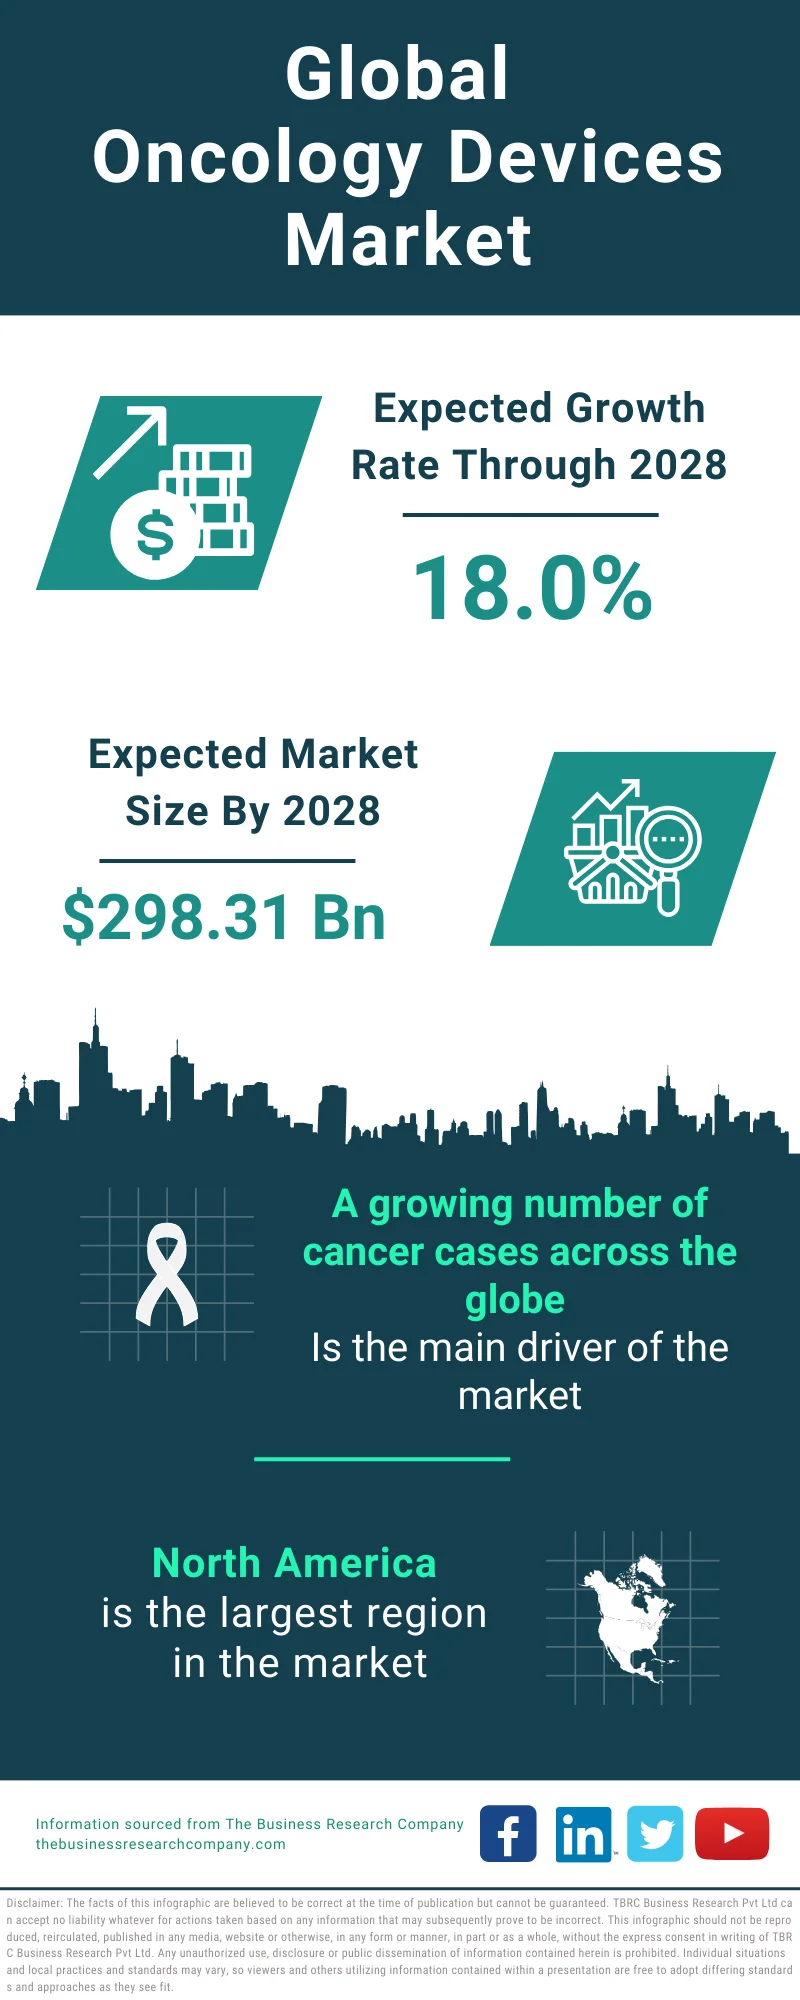 Oncology Devices Market